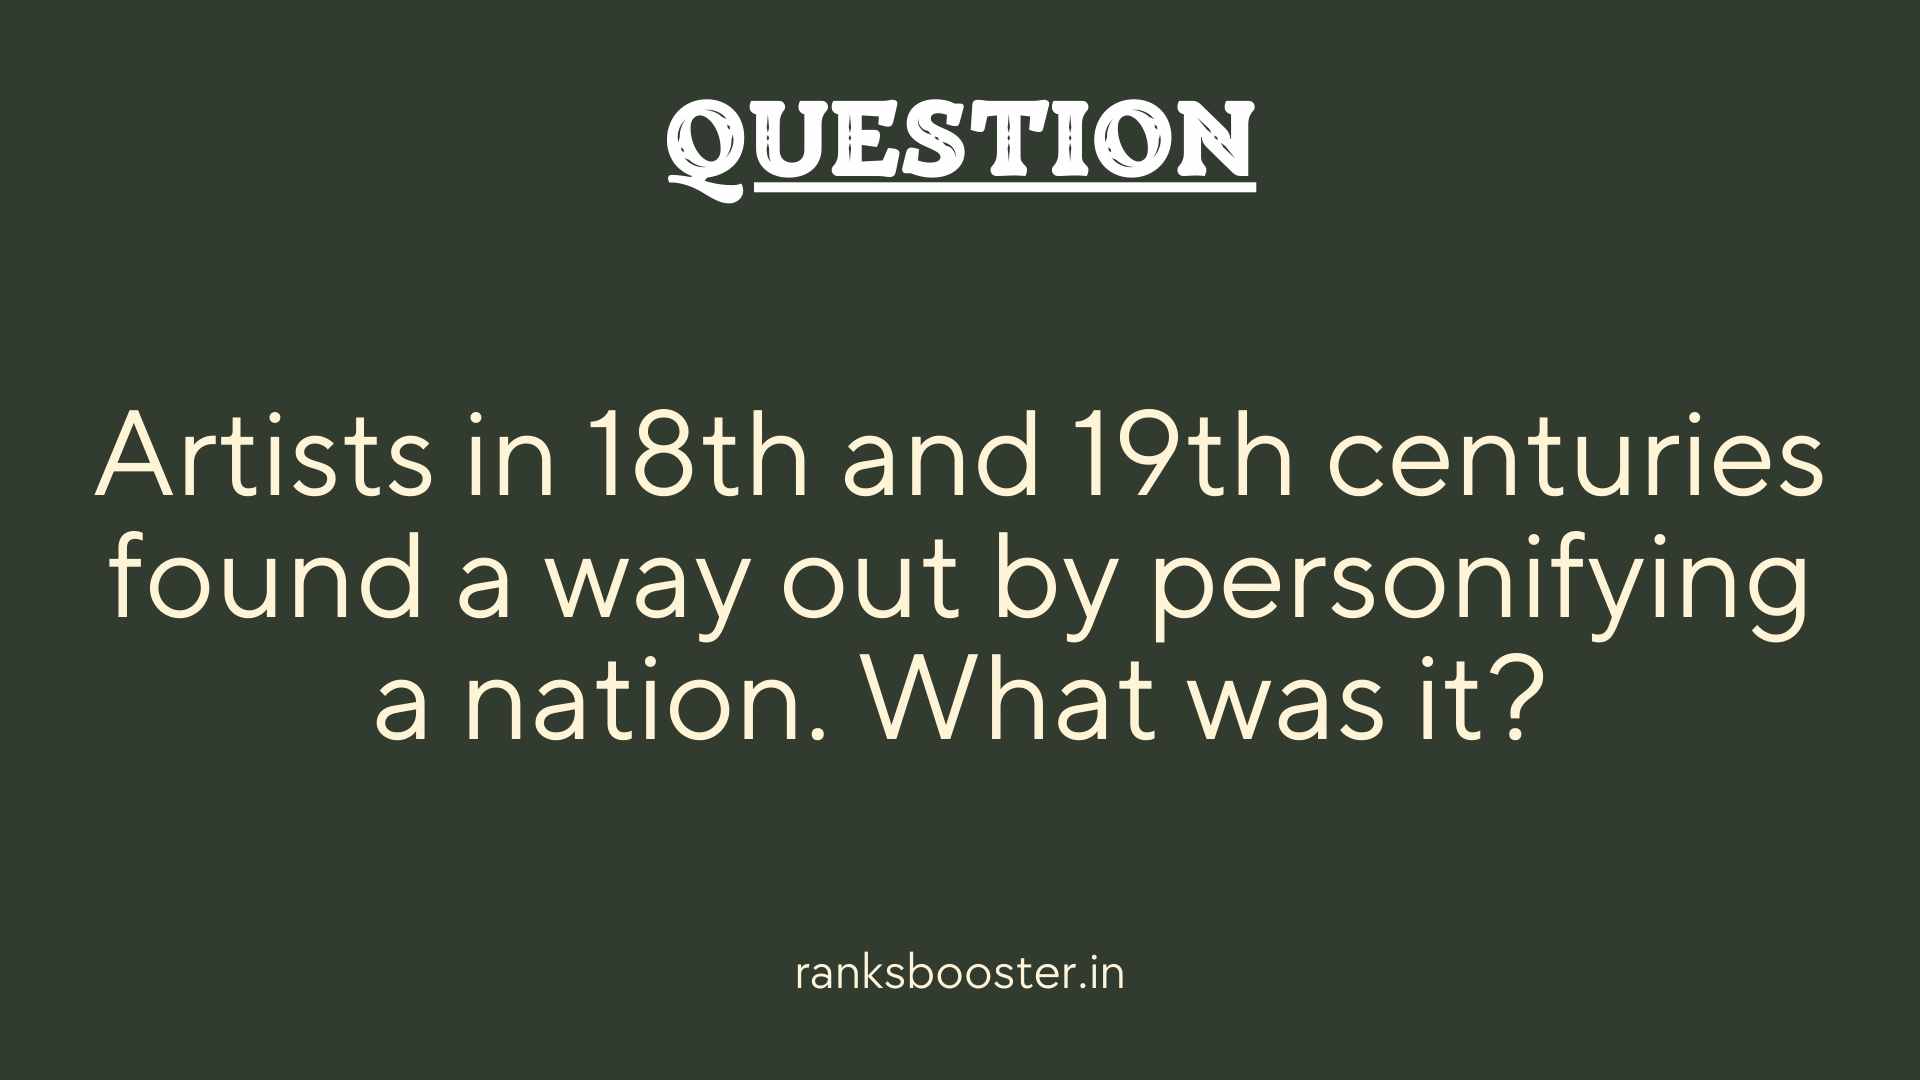 Question: Artists in 18th and 19th centuries found a way out by personifying a nation. What was it?